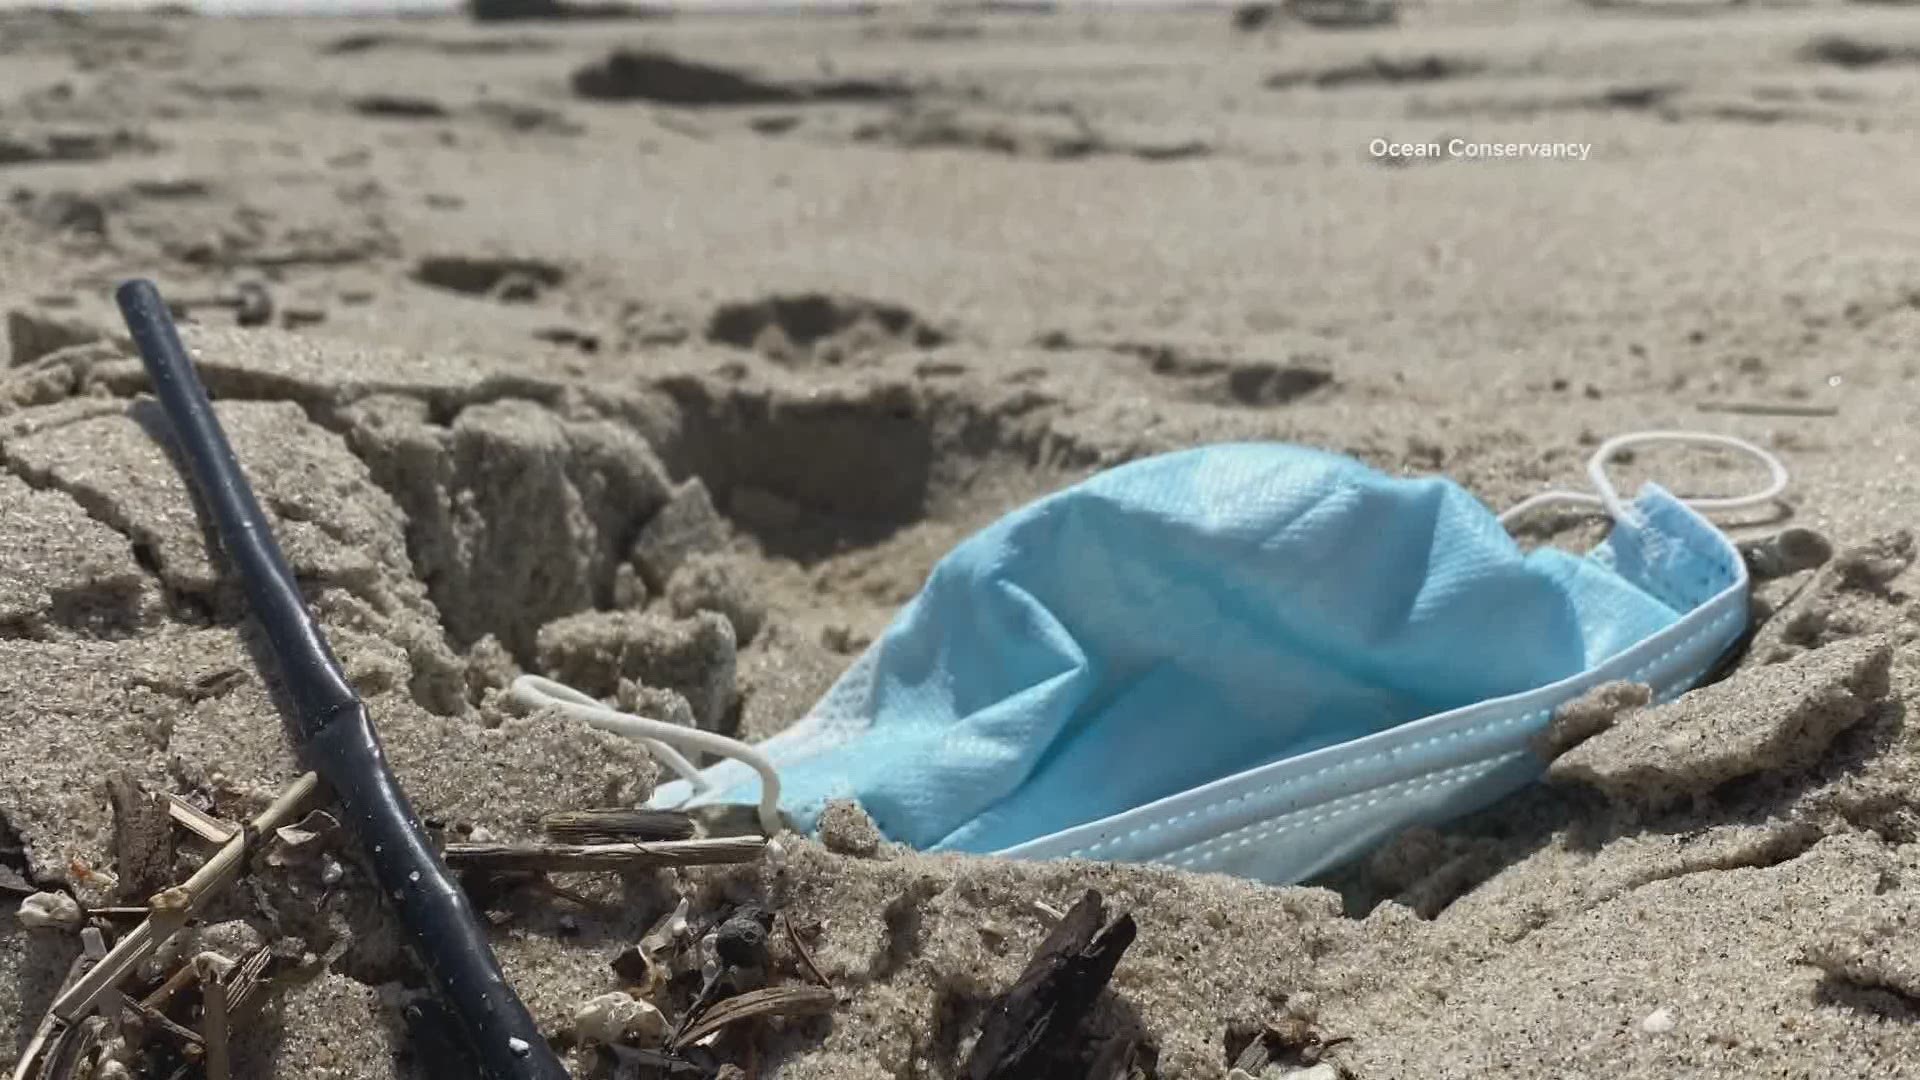 Disposable face masks and other PPE are becoming an emerging source of microplastic pollution not just in Washington state, but around the globe.